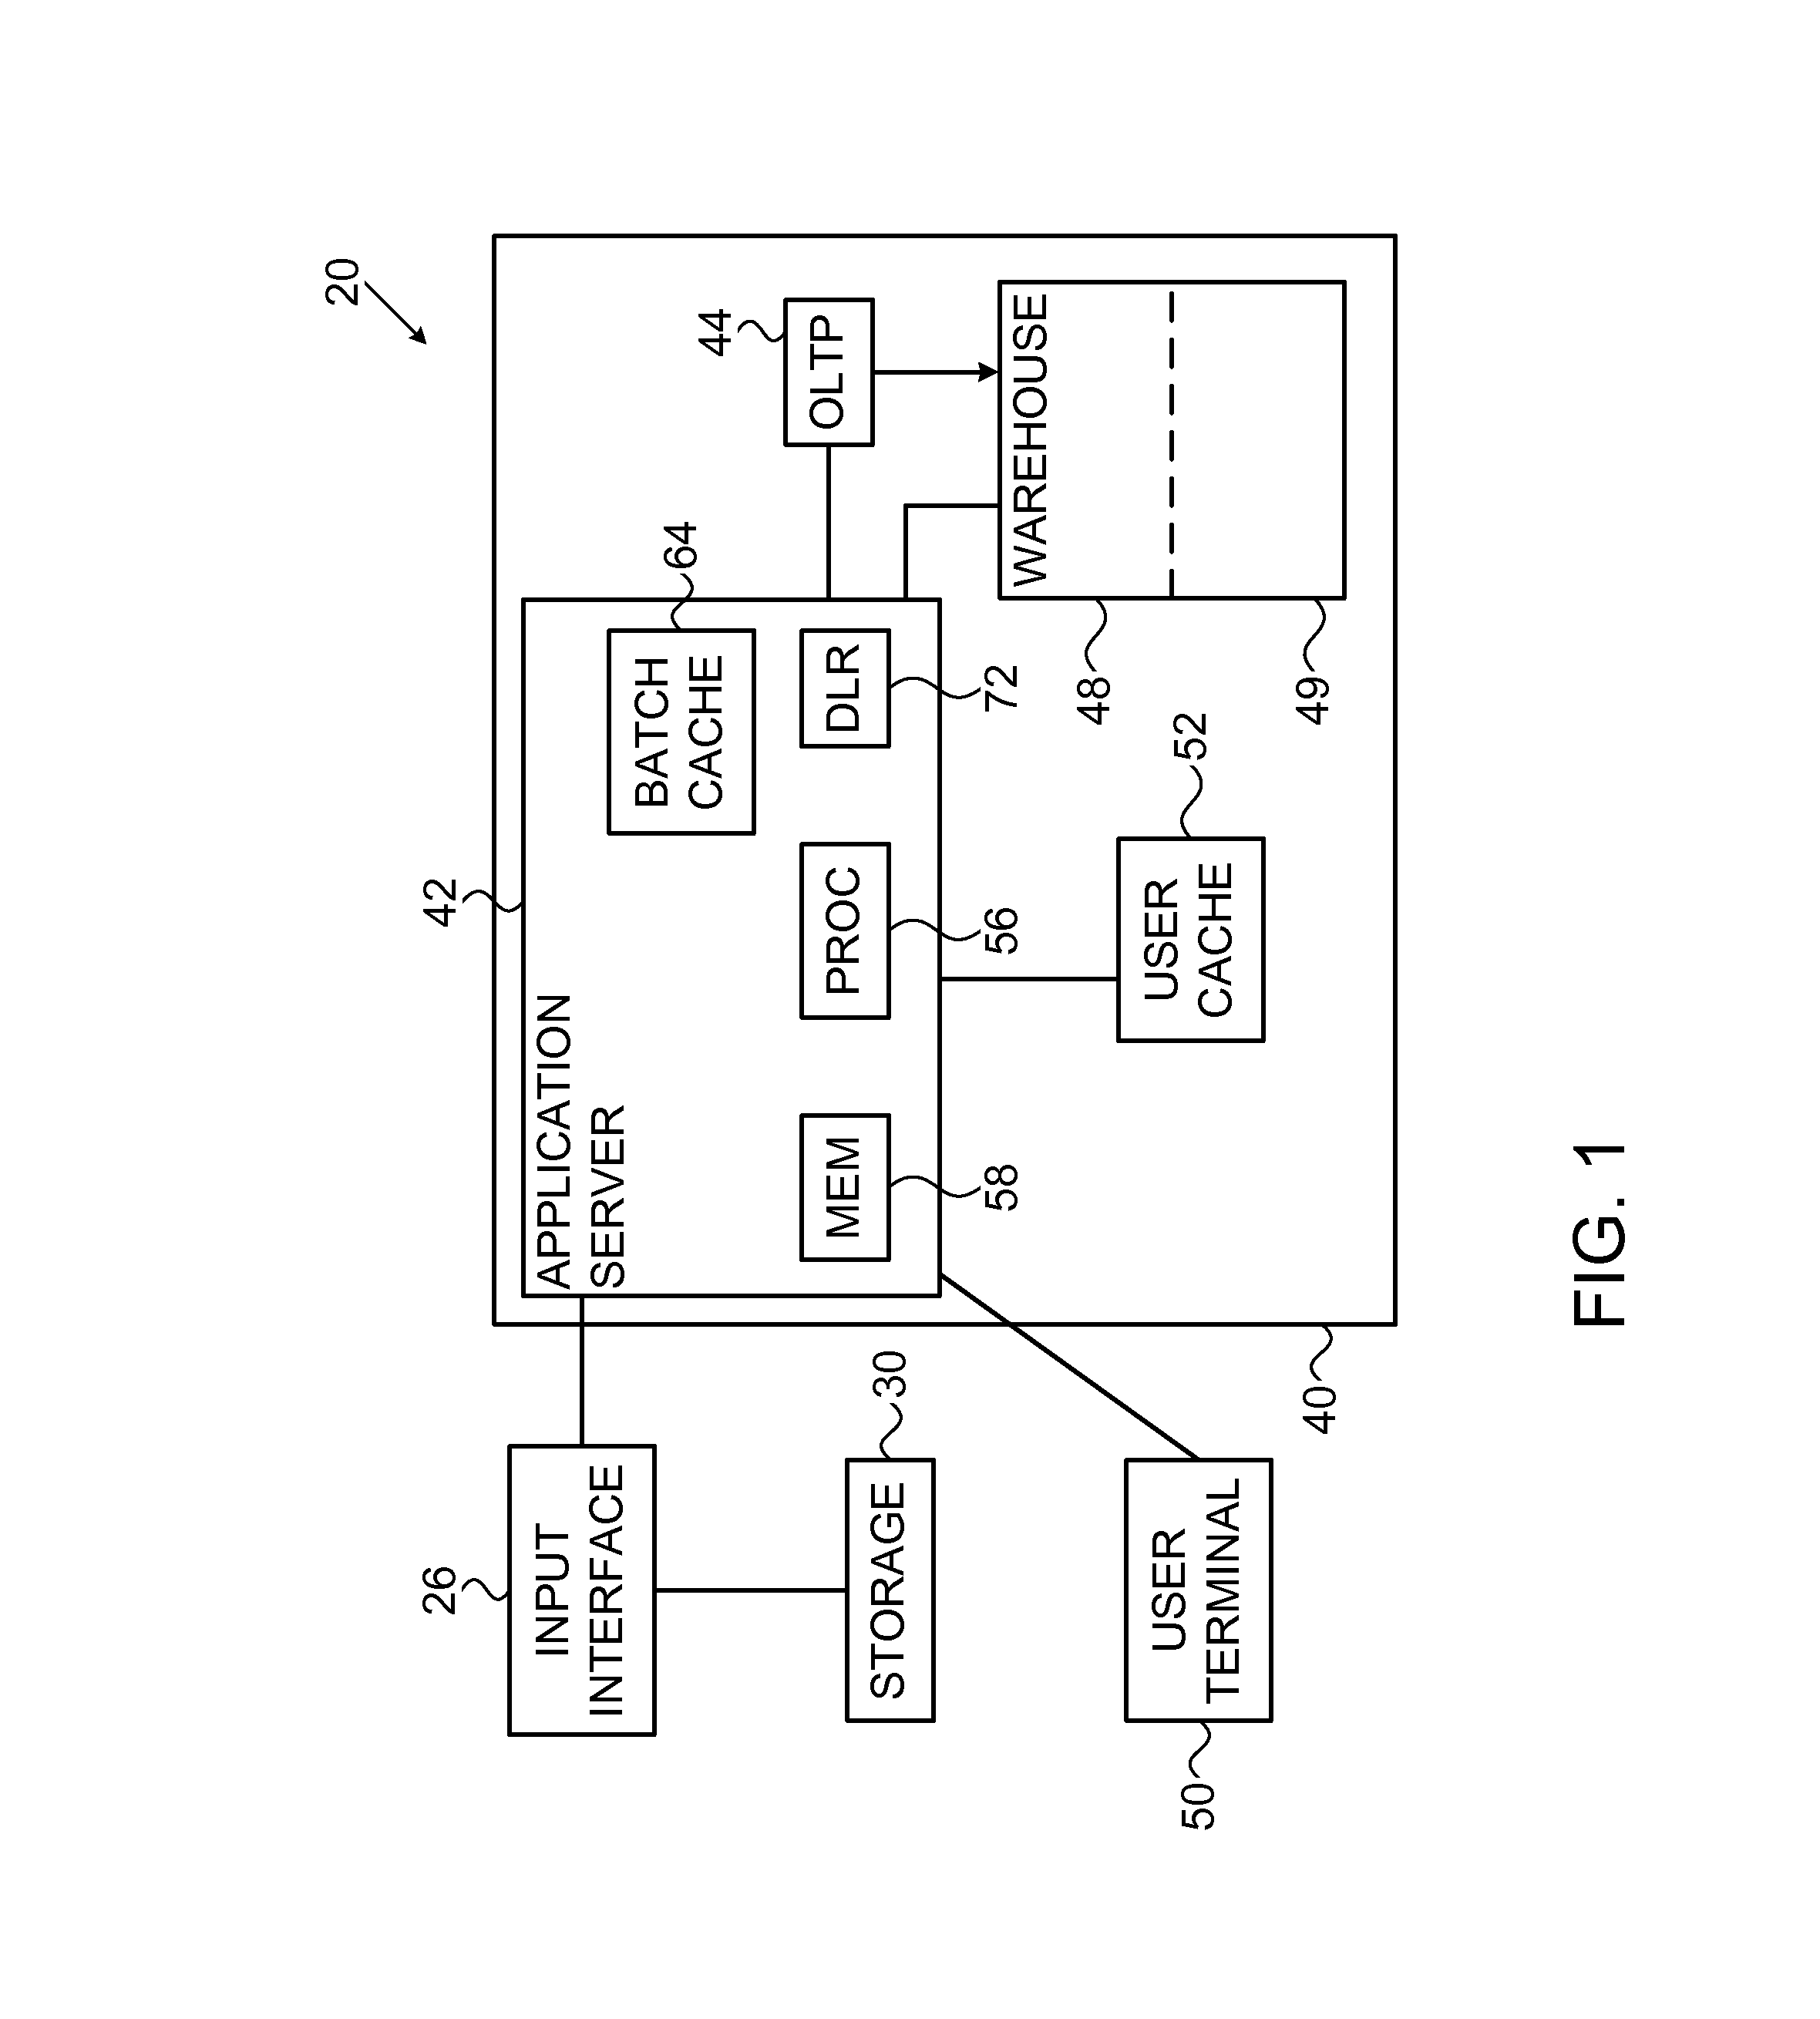 System and method of combined database system